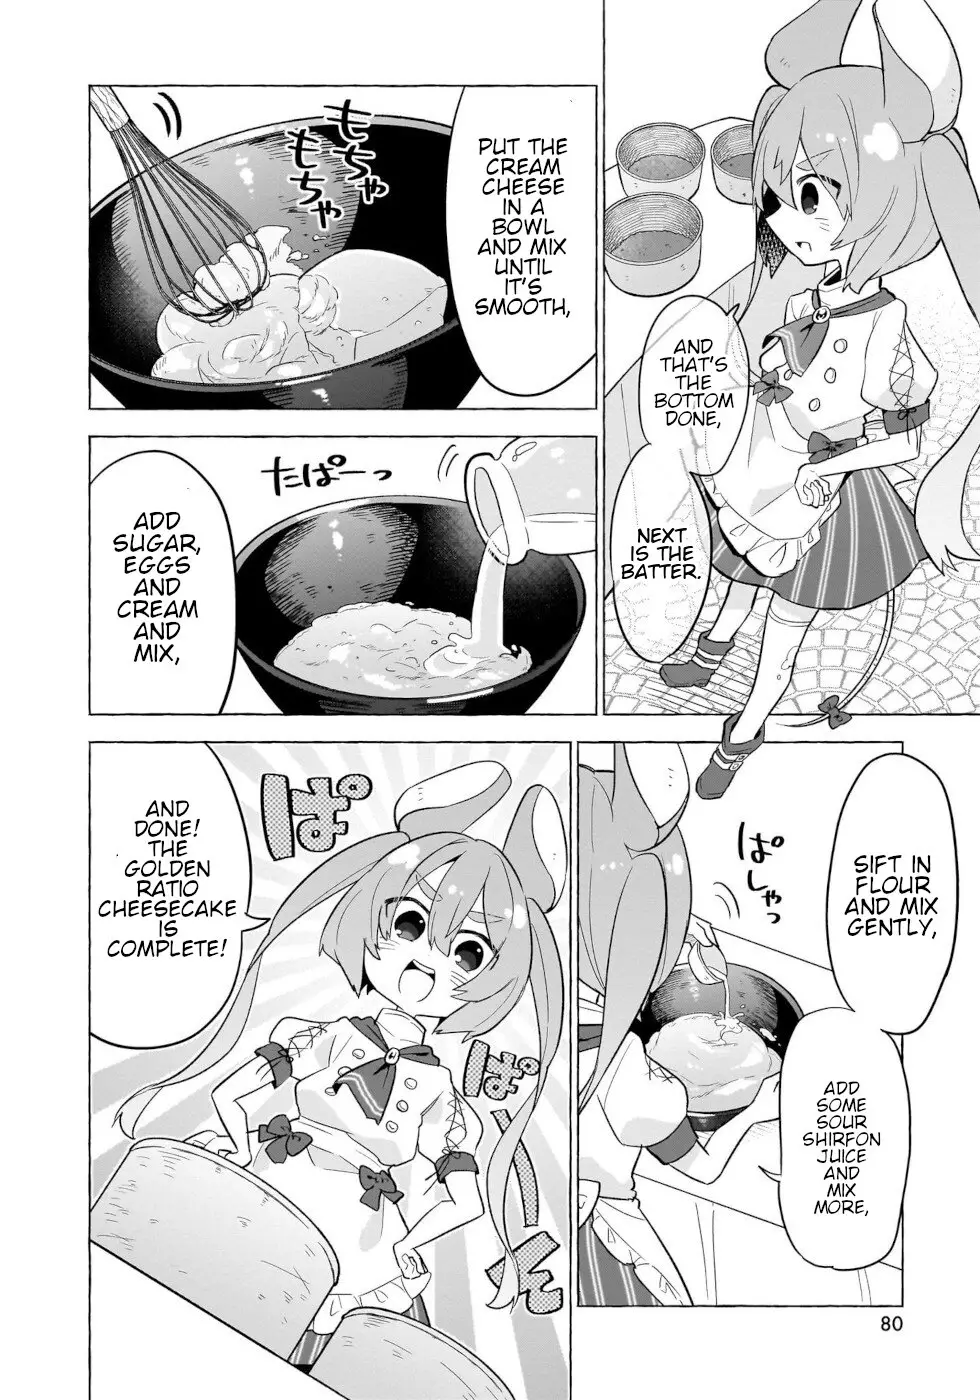 Sweets, Elf, And A High School Girl - 9 page 6-cf8101ed